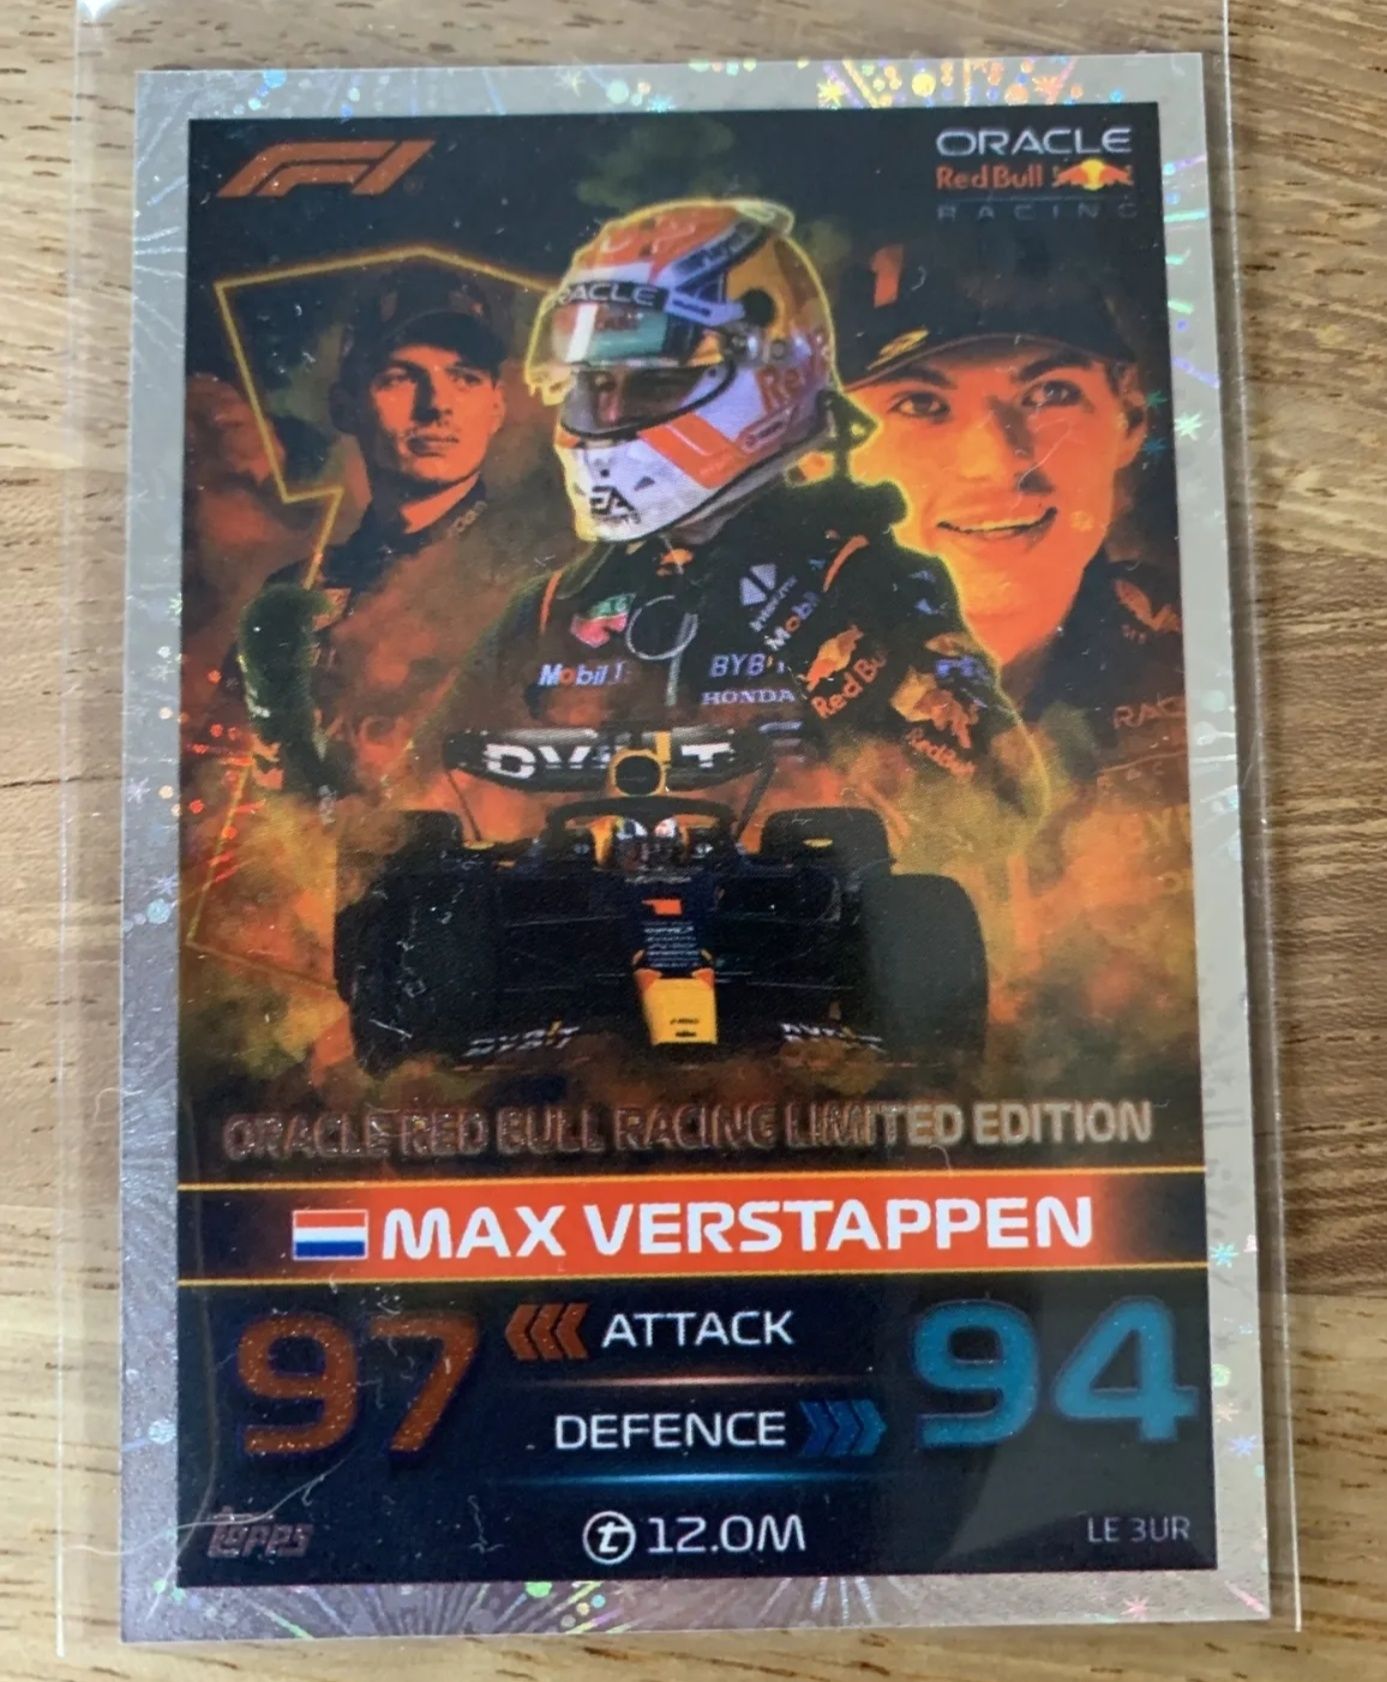 Topps Turbo Attax 2023 - LE 3UR - Max Verstappen Oracle RBR